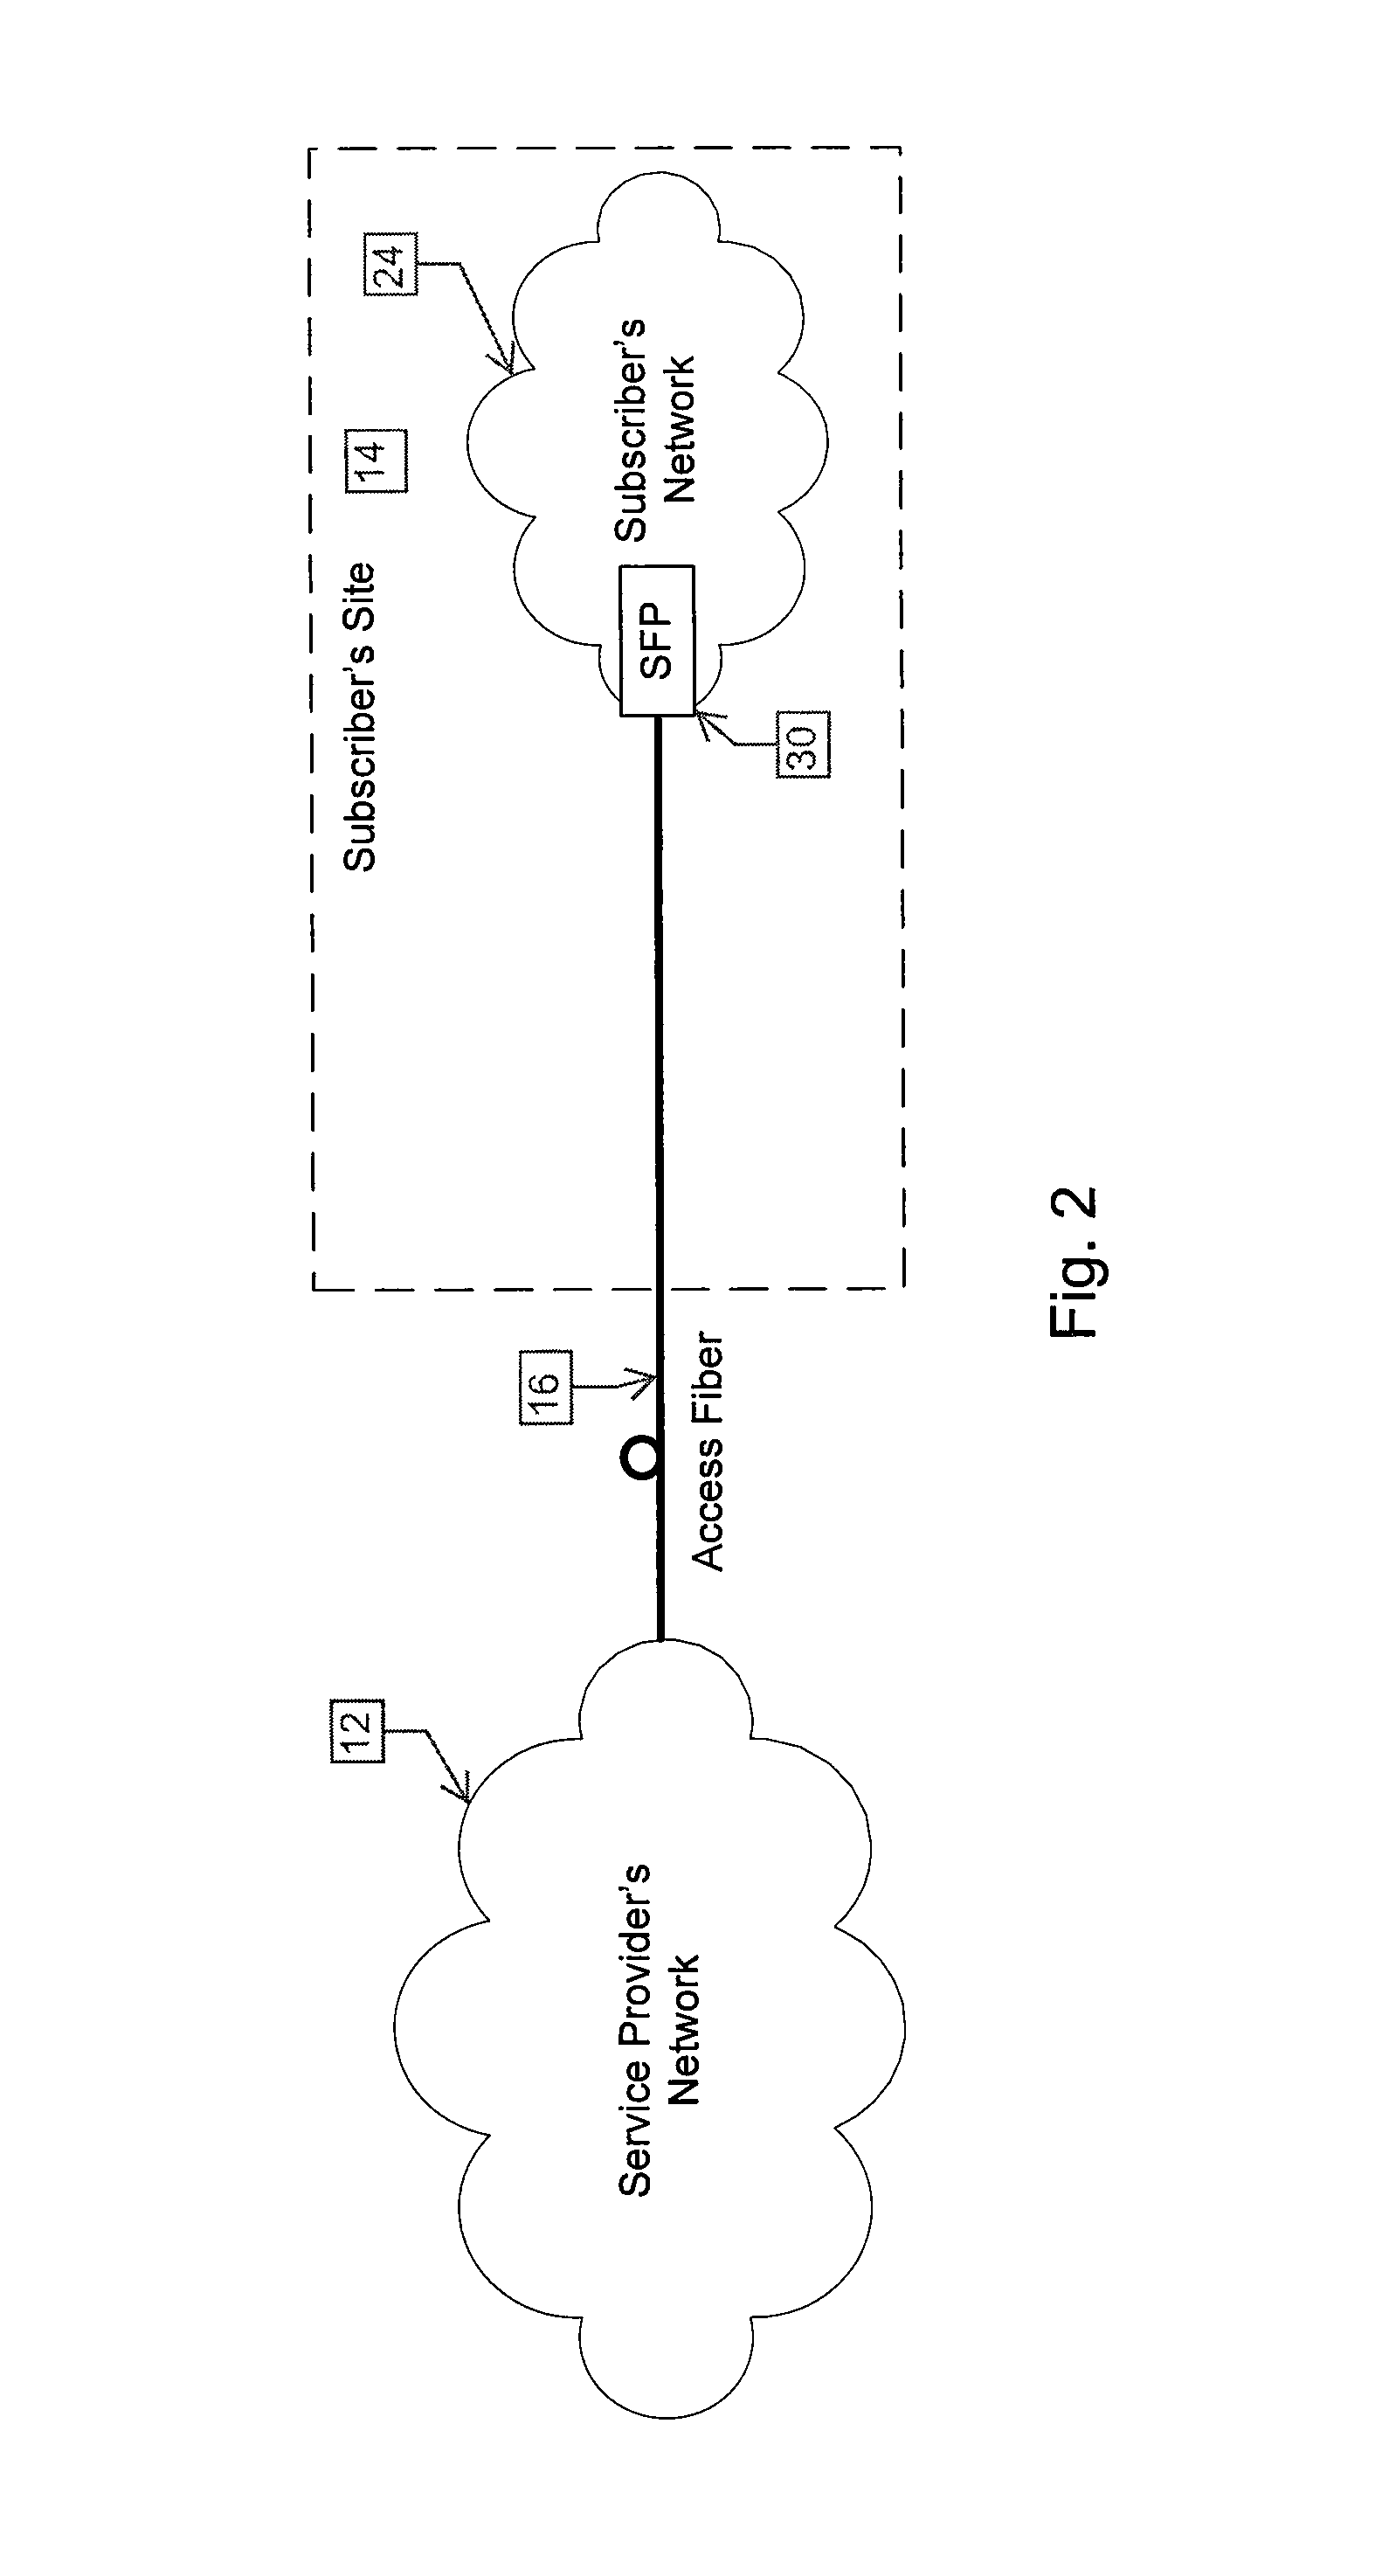 Methods and apparatuses for implementing a layer 3 internet protocol (IP) echo response function on a small form-factor pluggable (SFP) transceiver and providing a universal interface between an SFP transceiver and network equipment